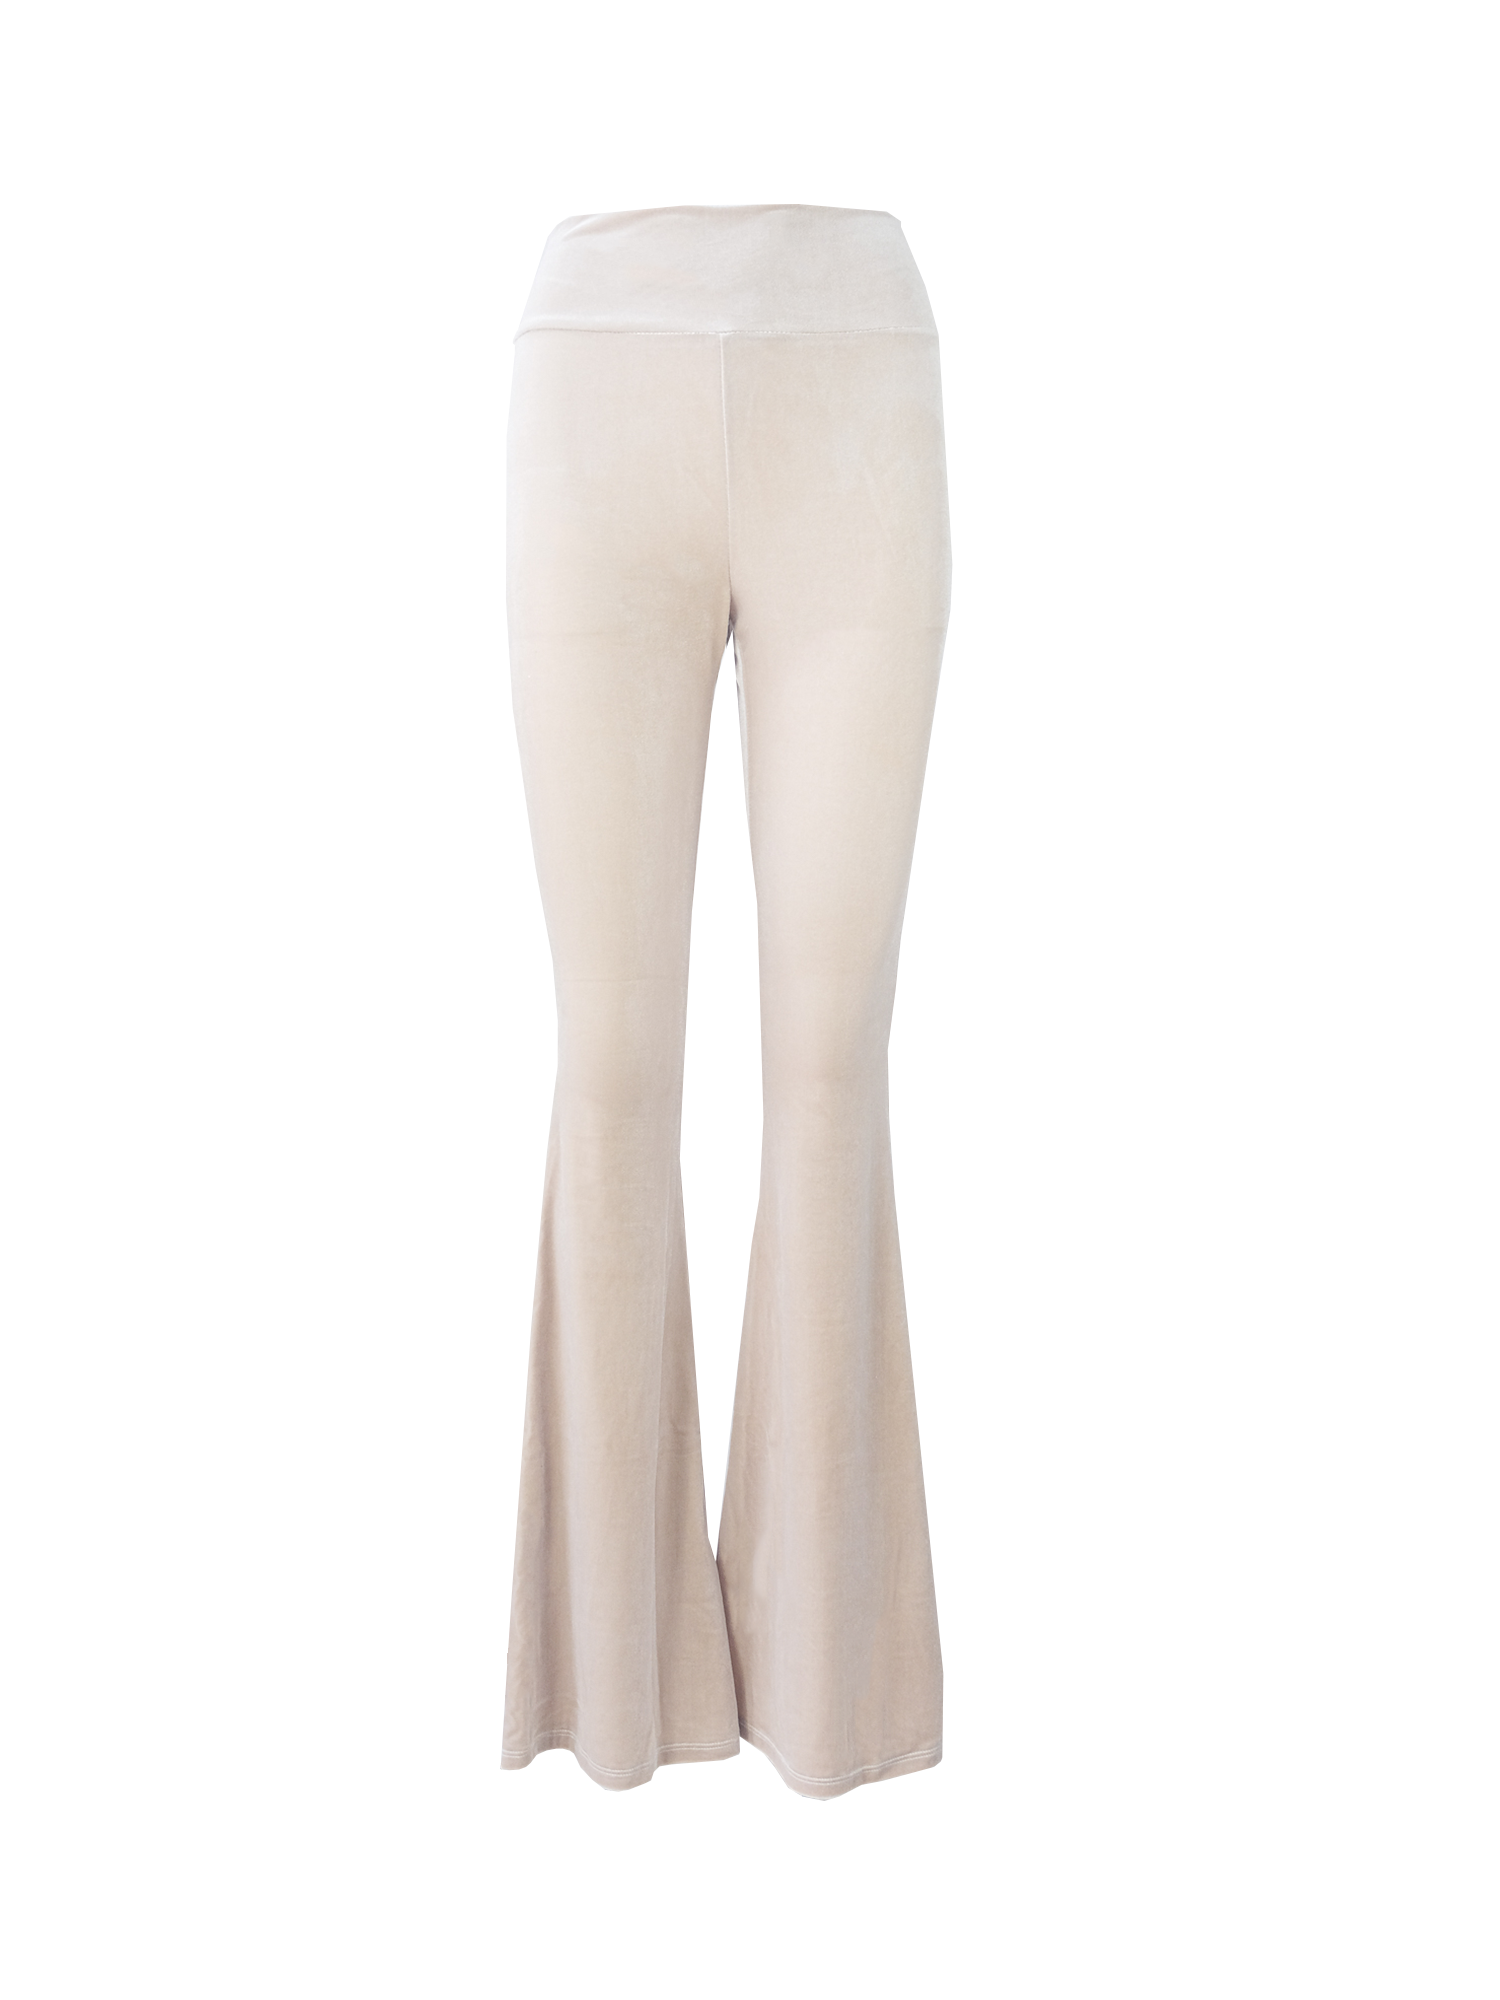 LOLA - flared trousers with high waist in beige chenille